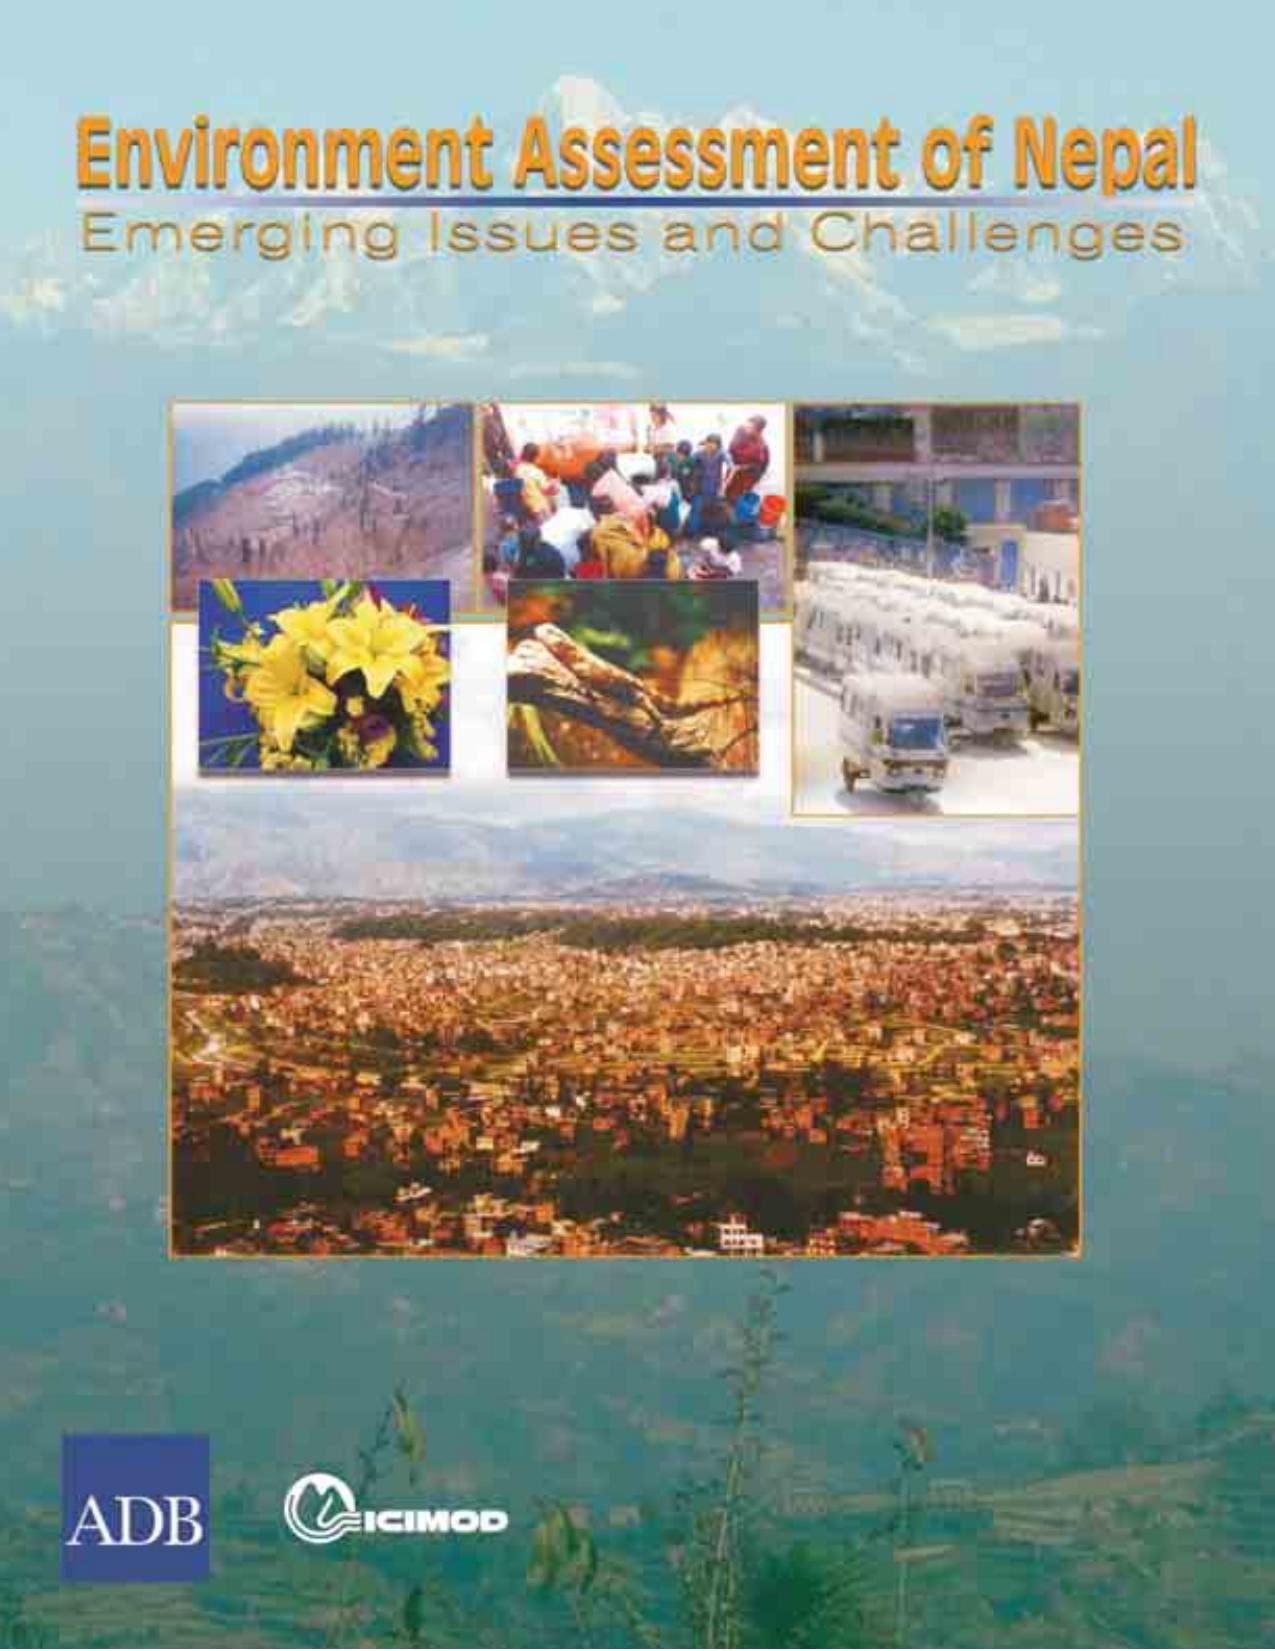 environmental problems in nepal essay